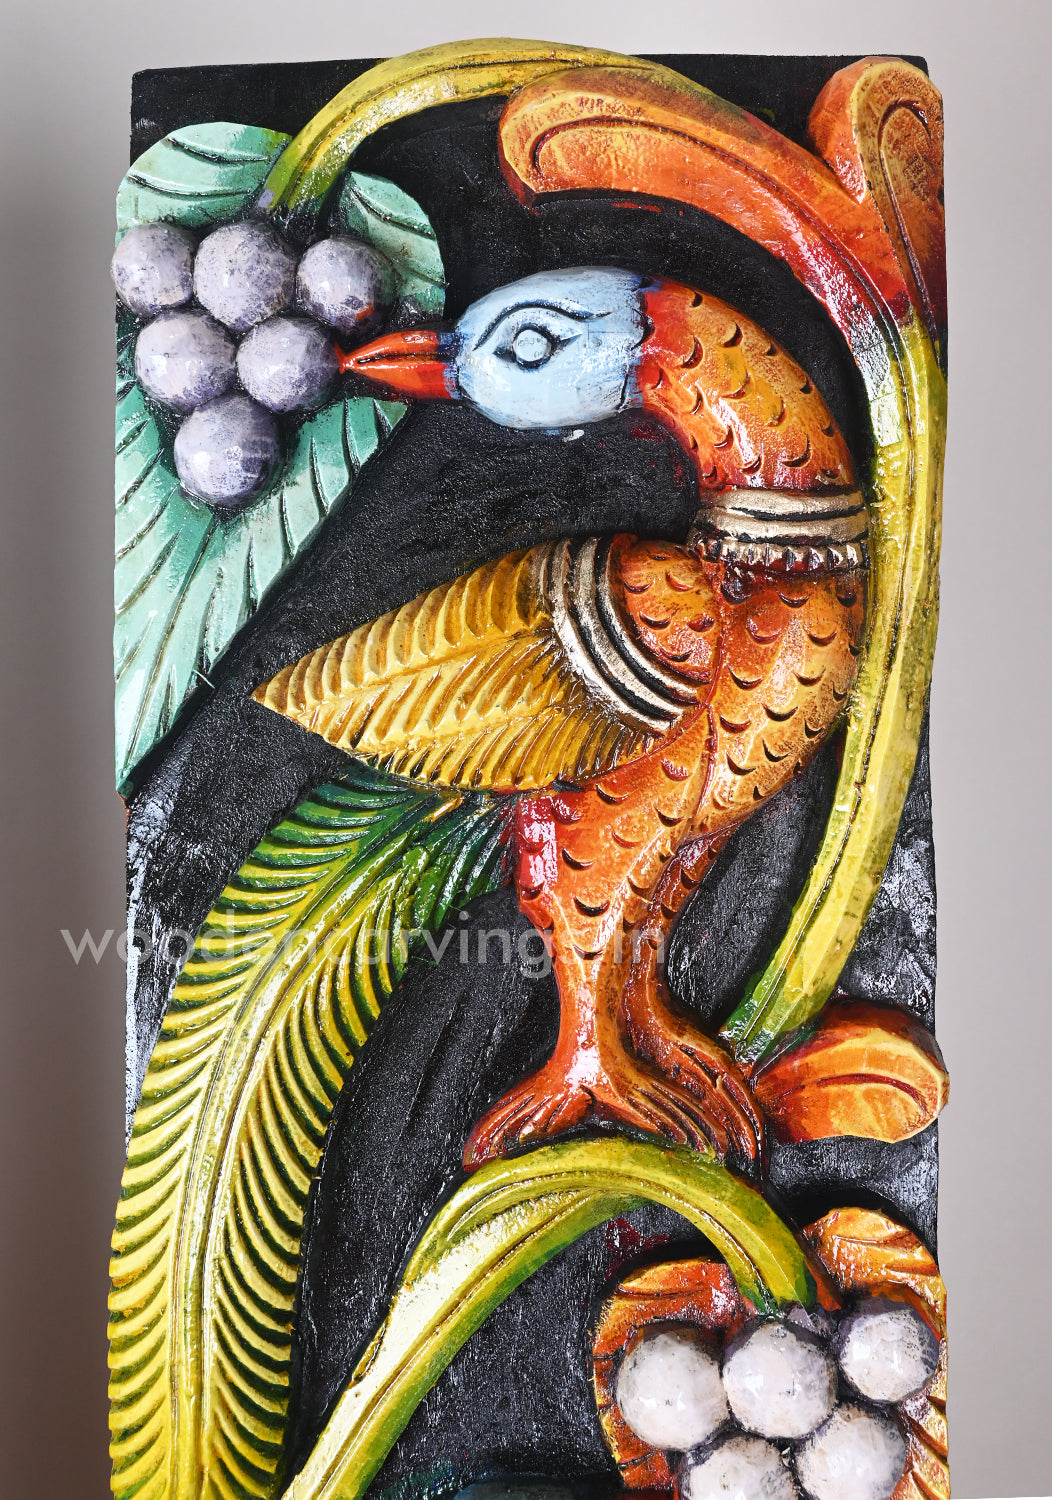 Parrots With Paired Blue Elephants Standing on Grapes Tree Multicoloured Wooden Wall Panel 36"